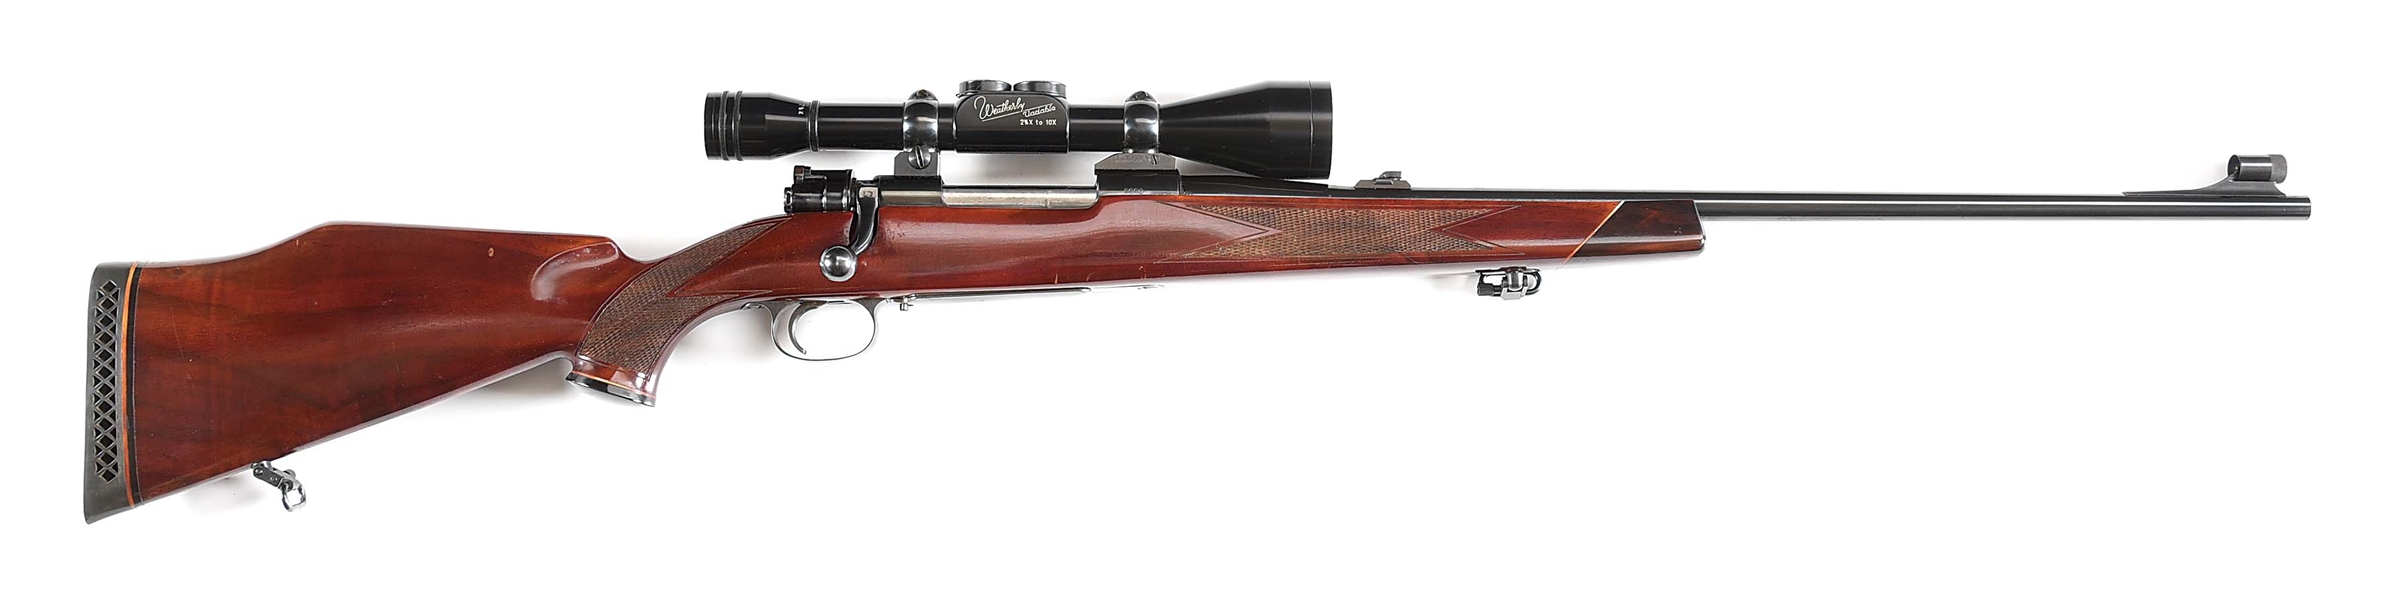 (M) WEATHERBY SOUTH GATE BOLT ACTION RIFLE IN .270 WEATHERBY MAGNUM.